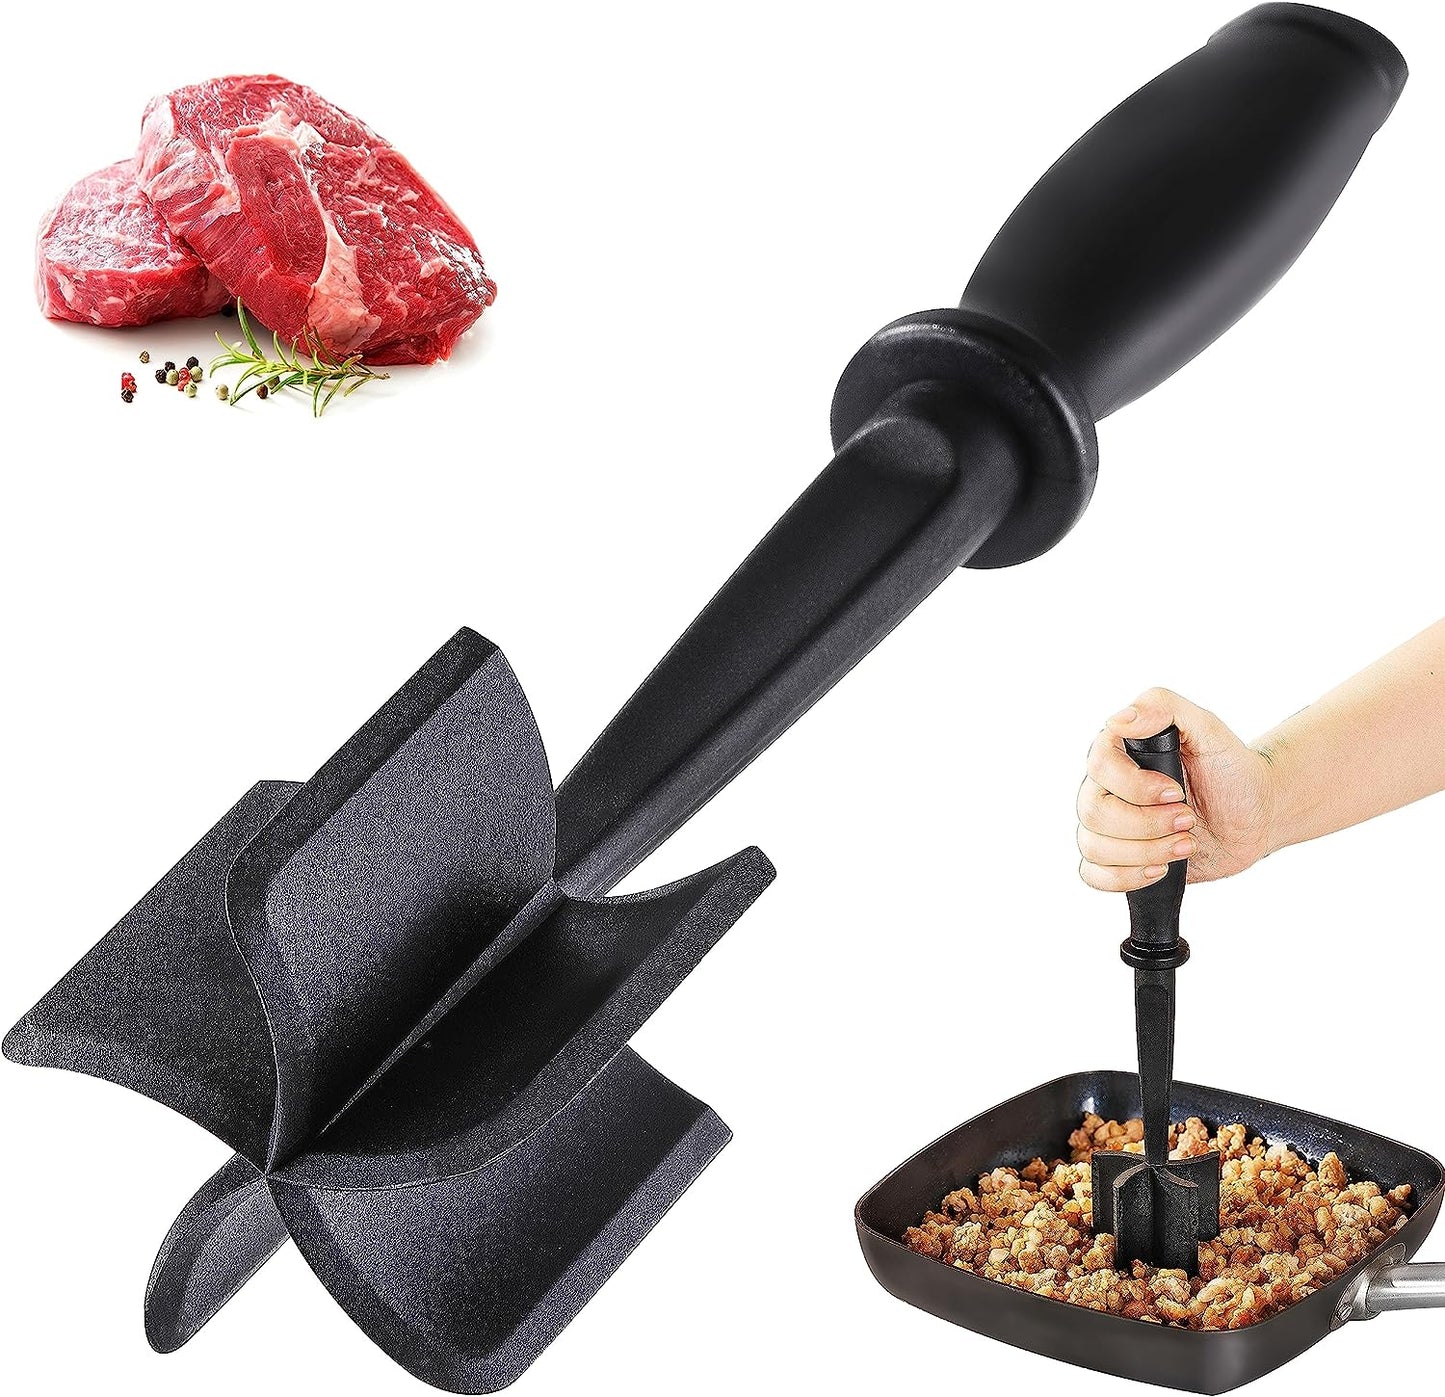 Meat Chopper for Ground Beef, Heat Resistant Meat Masher for Hamburger Meat, 5 Curved Blades Ground Beef Smasher, Nylon Meat Spatula Chopper, Non Stick Hamburger Chopper, Mix and Chop Kitchen Tool